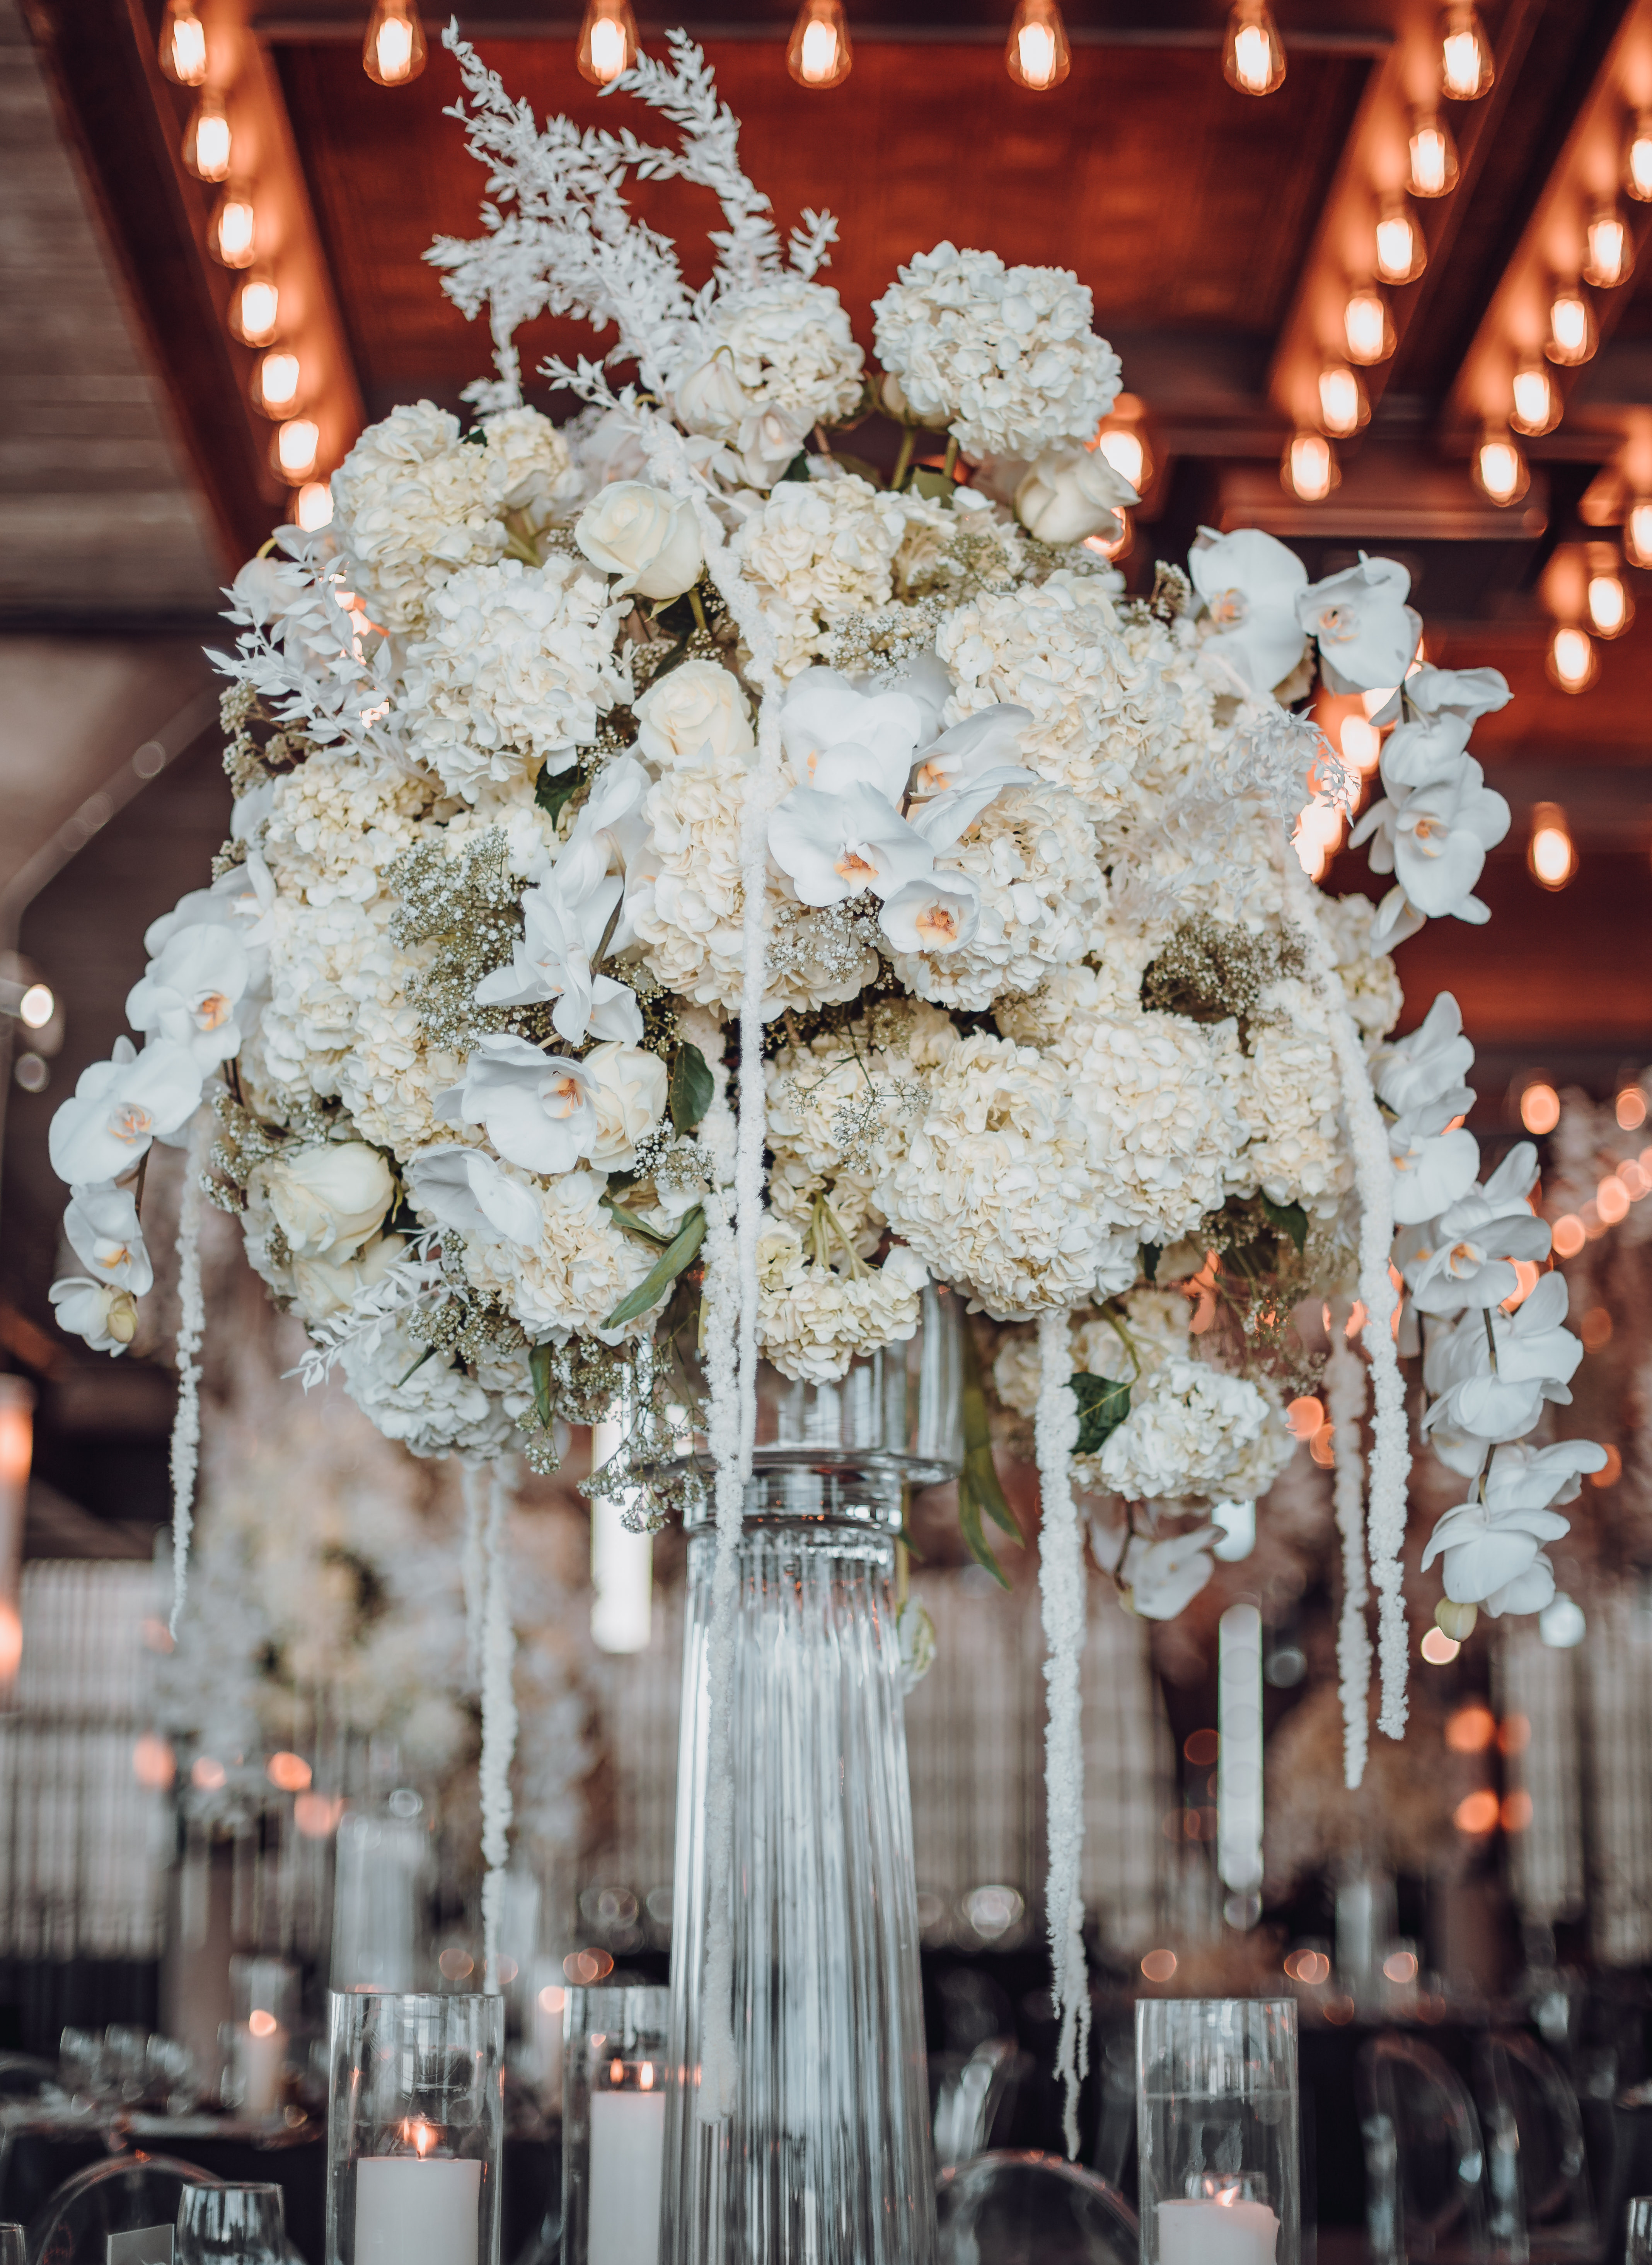 A tall centerpiece at a wedding reception with white flowers in it.